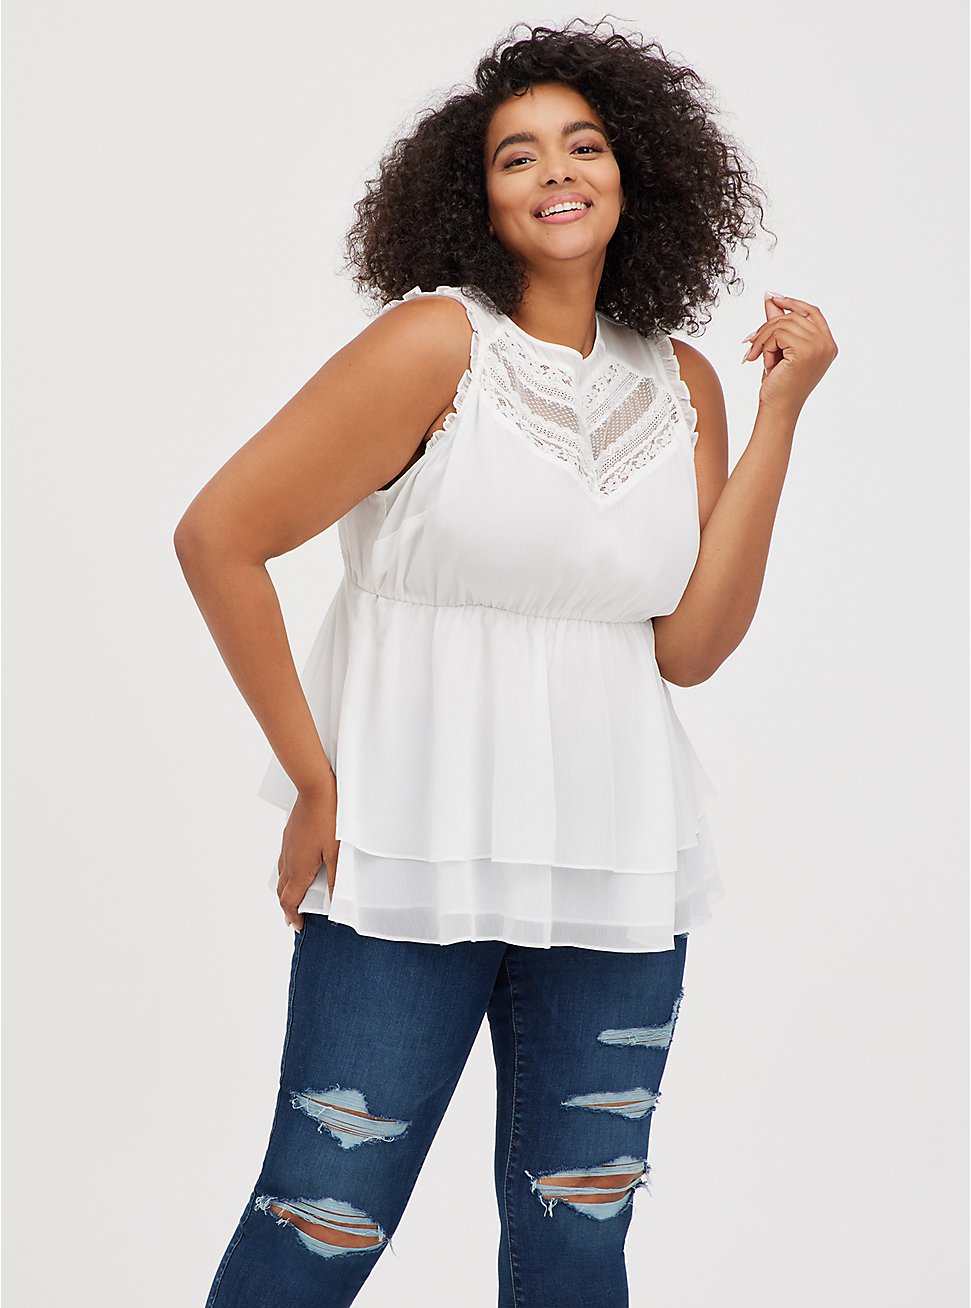 MM11 Details about  / Torrid Plus Size 6//6X Tiered Lace Babydoll Top Sleeveless White